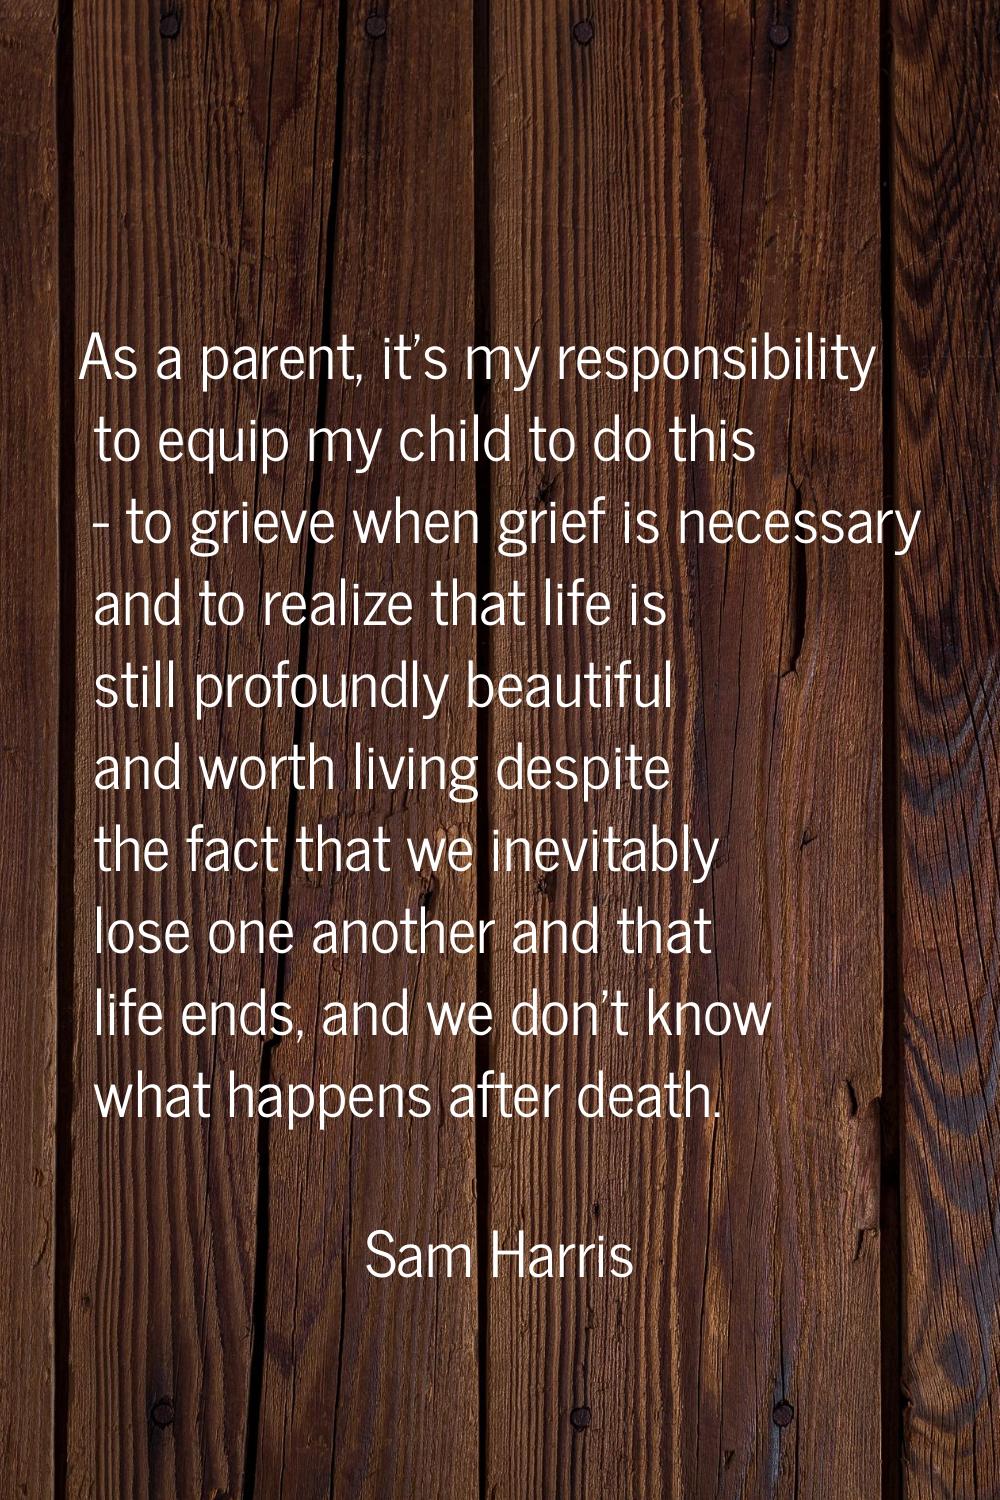 As a parent, it's my responsibility to equip my child to do this - to grieve when grief is necessar